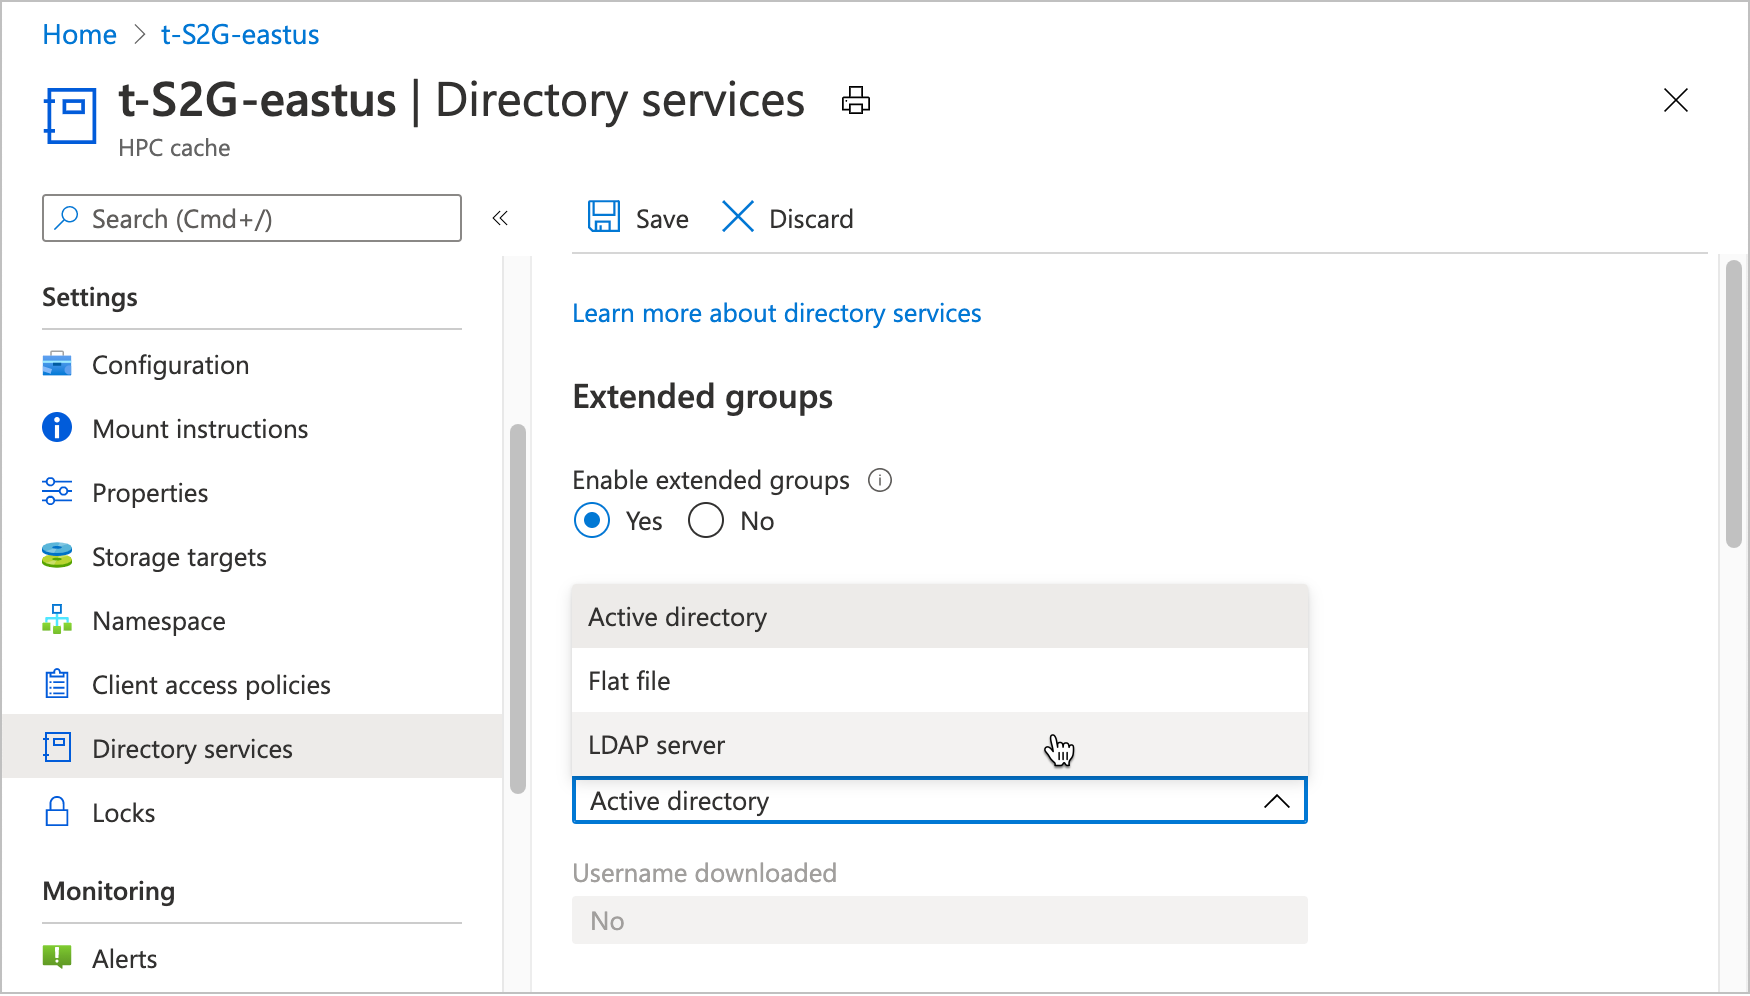 Screenshot of directory services page settings page in portal, with the Yes option selected for extended groups, and the drop-down menu labeled 'Download source' open.